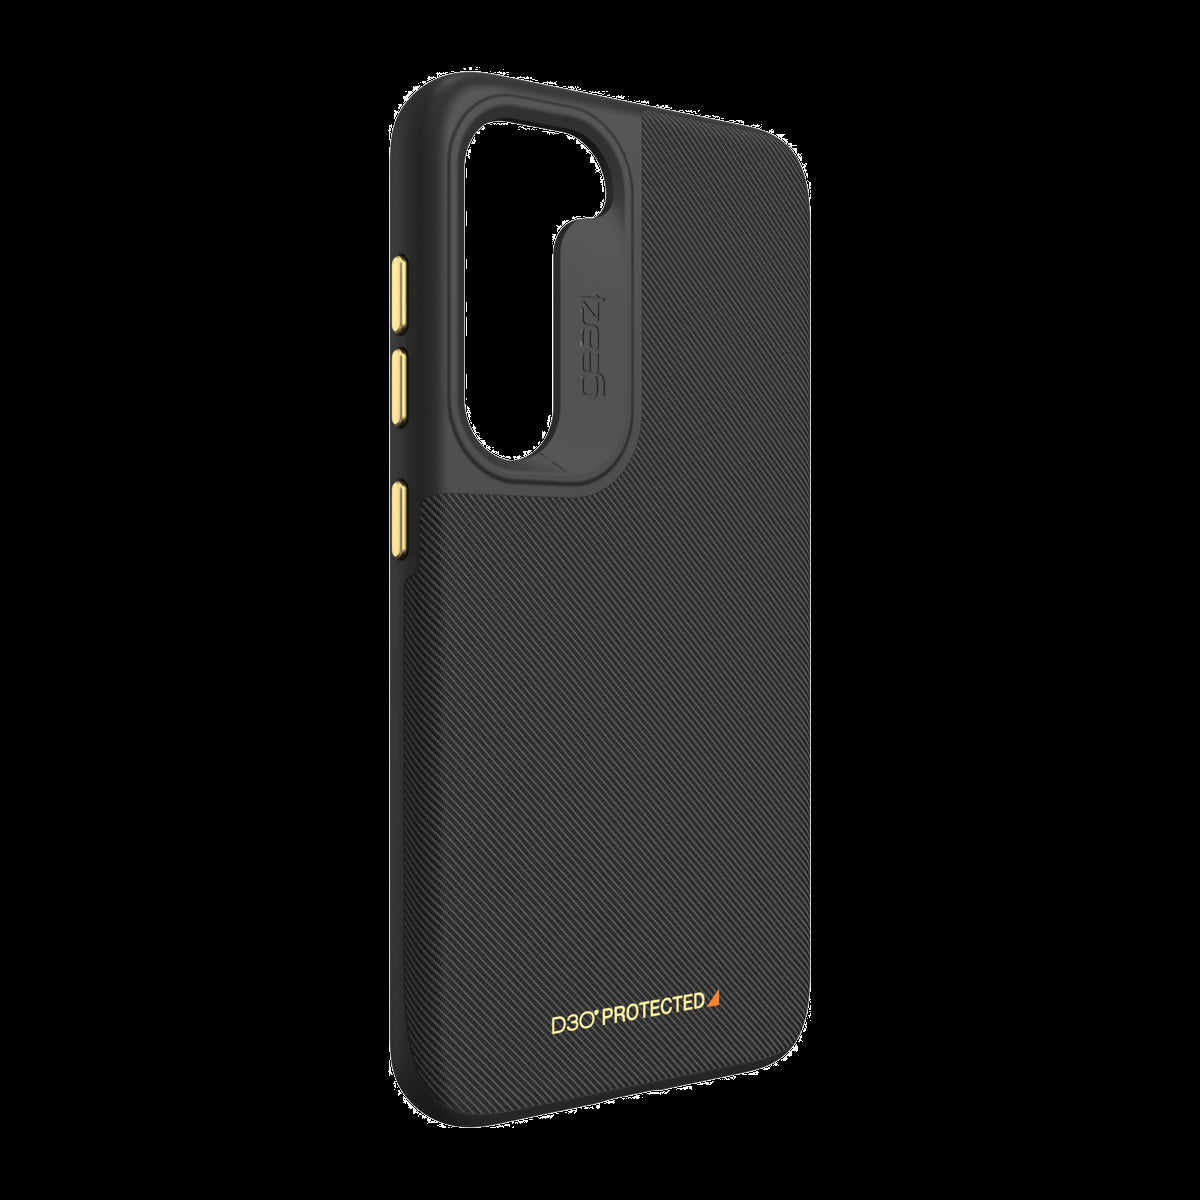 Bringing life to the joy of style, the Gear4 London case offers up to 13-foot drop protection in a slim design that boasts textured, fabric-based finishing.